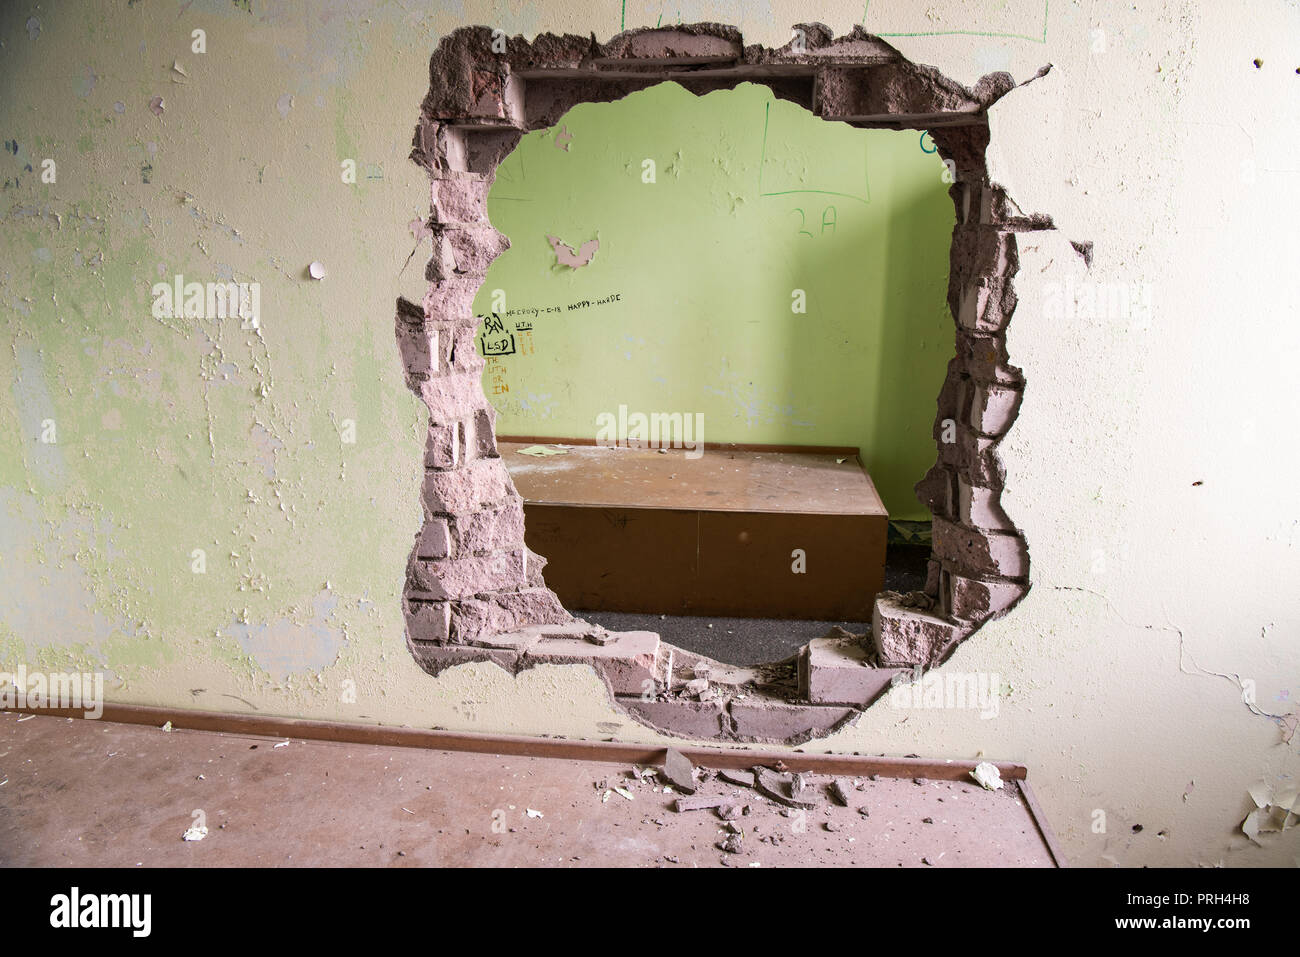 Hole punched through the wall between two prison cells Stock Photo